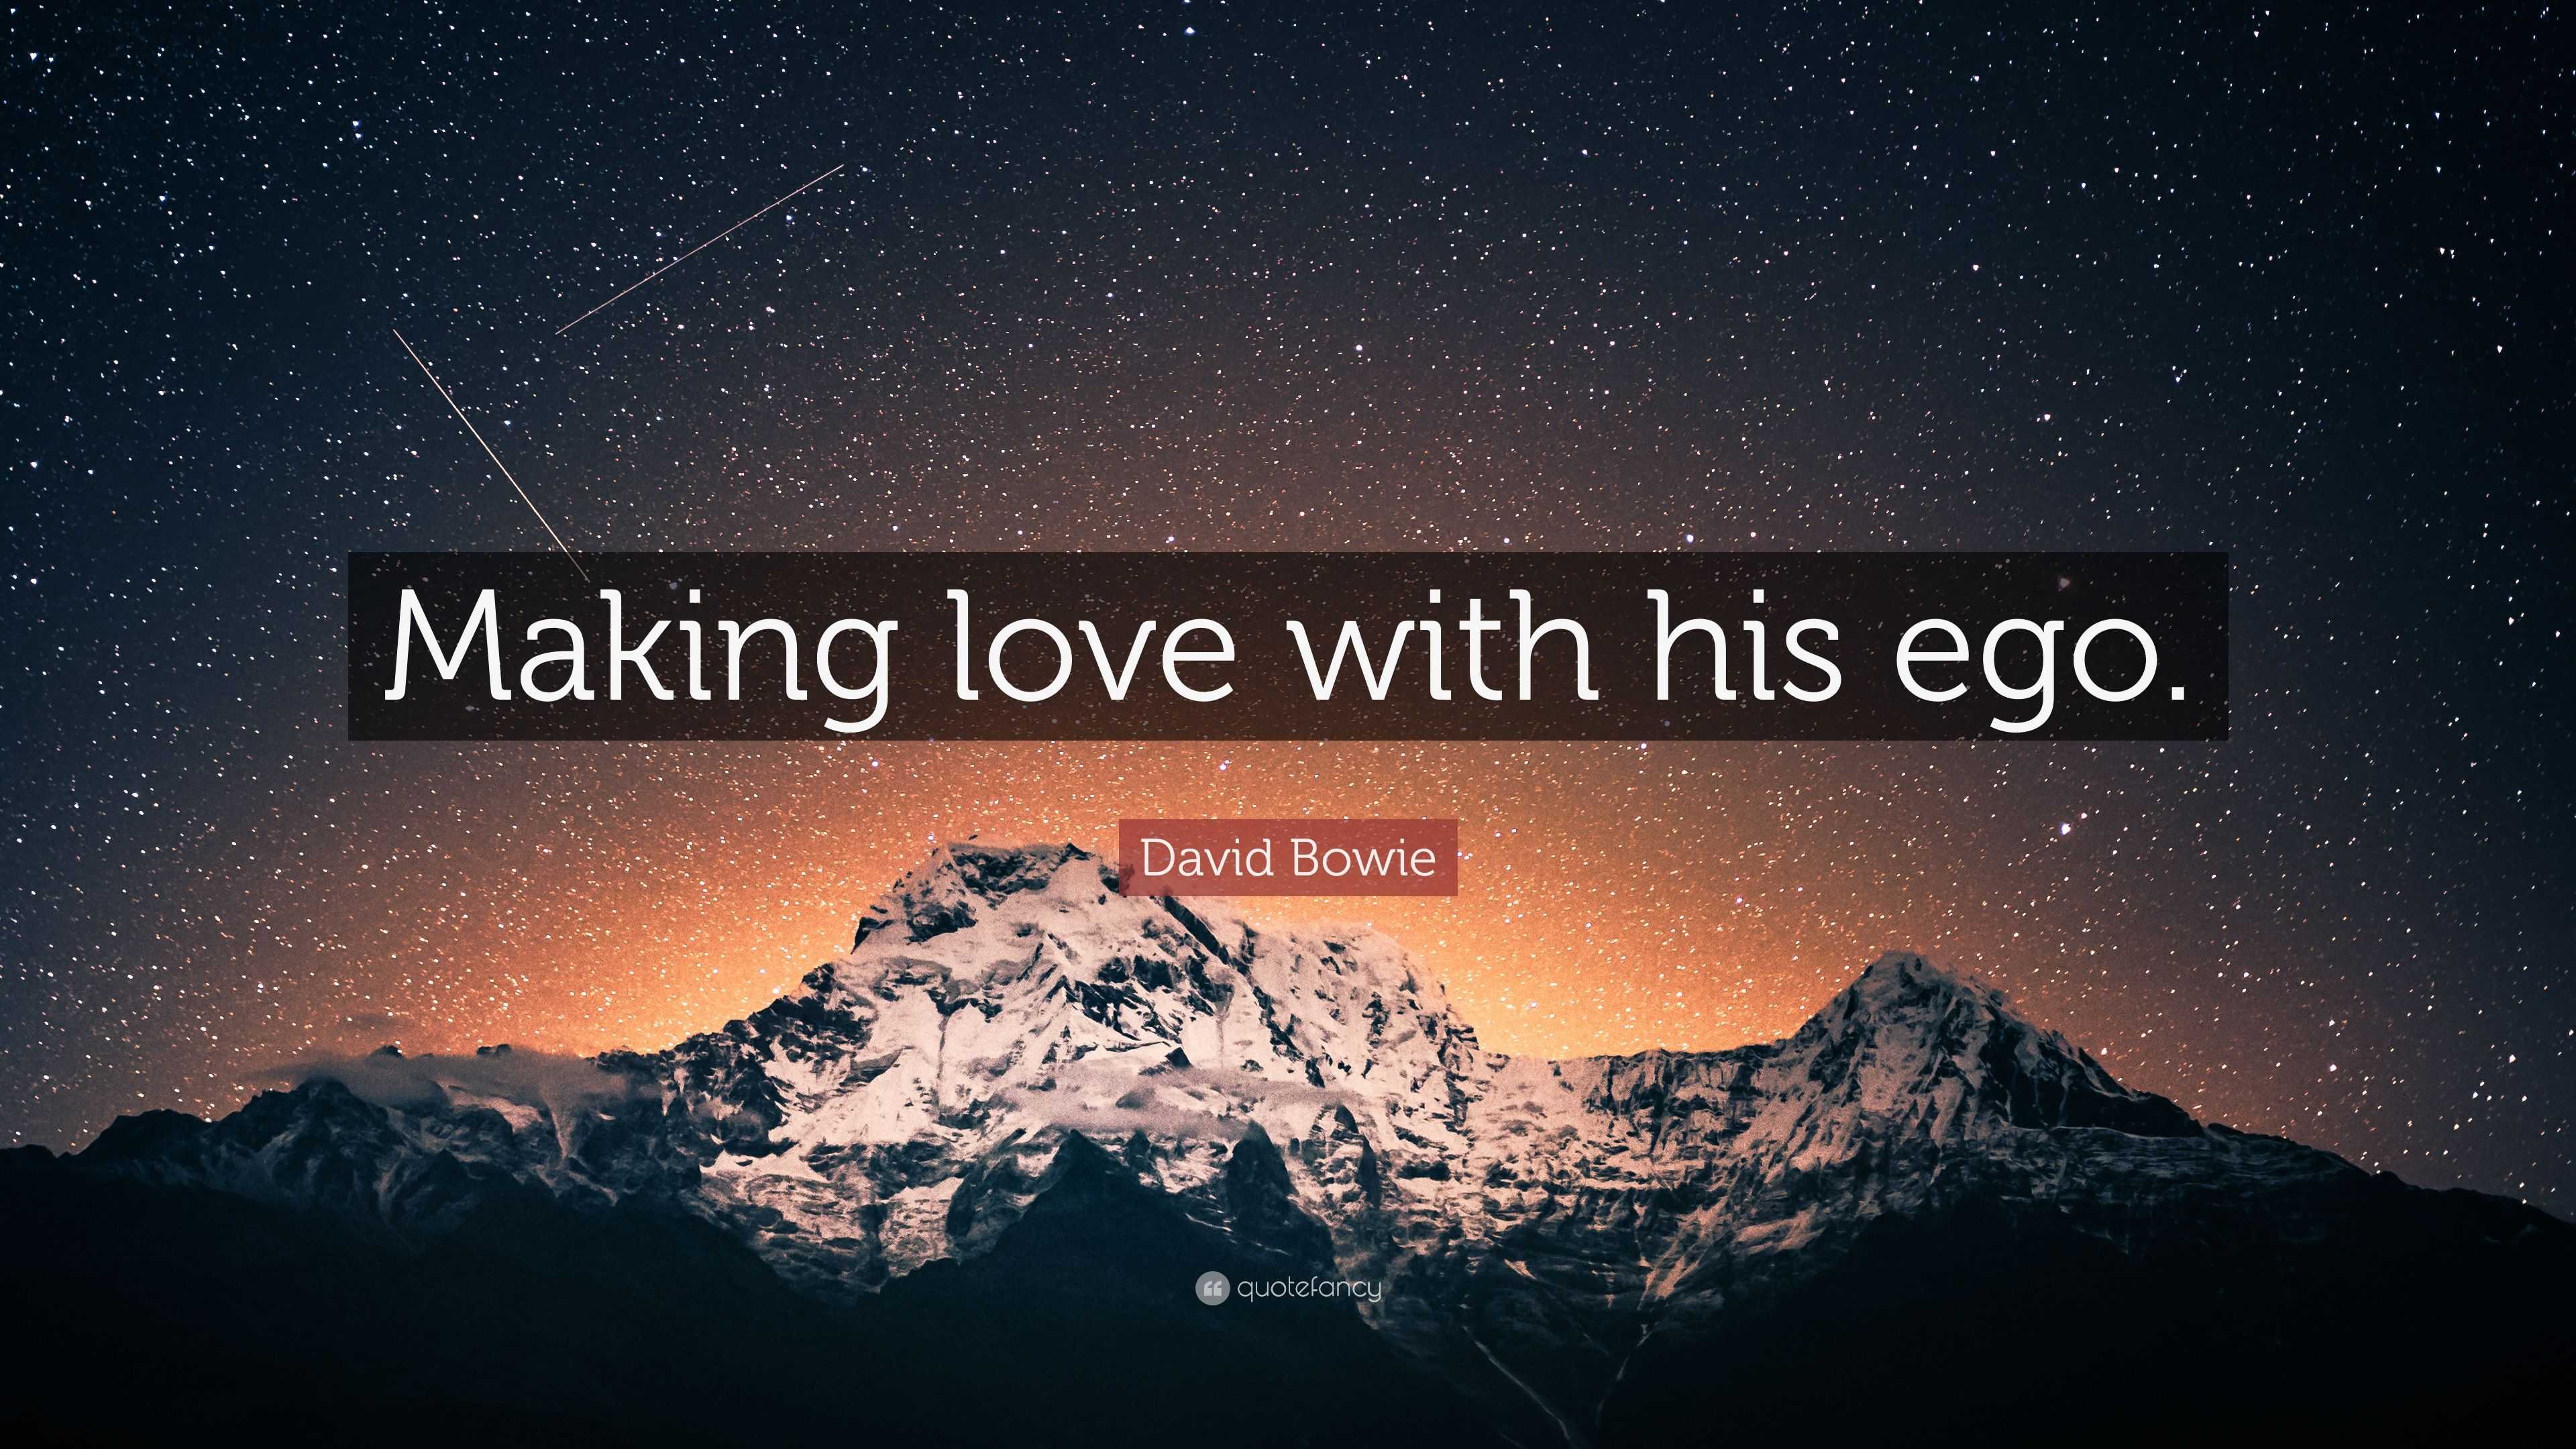 David Bowie Quote “Making love with his ego ”